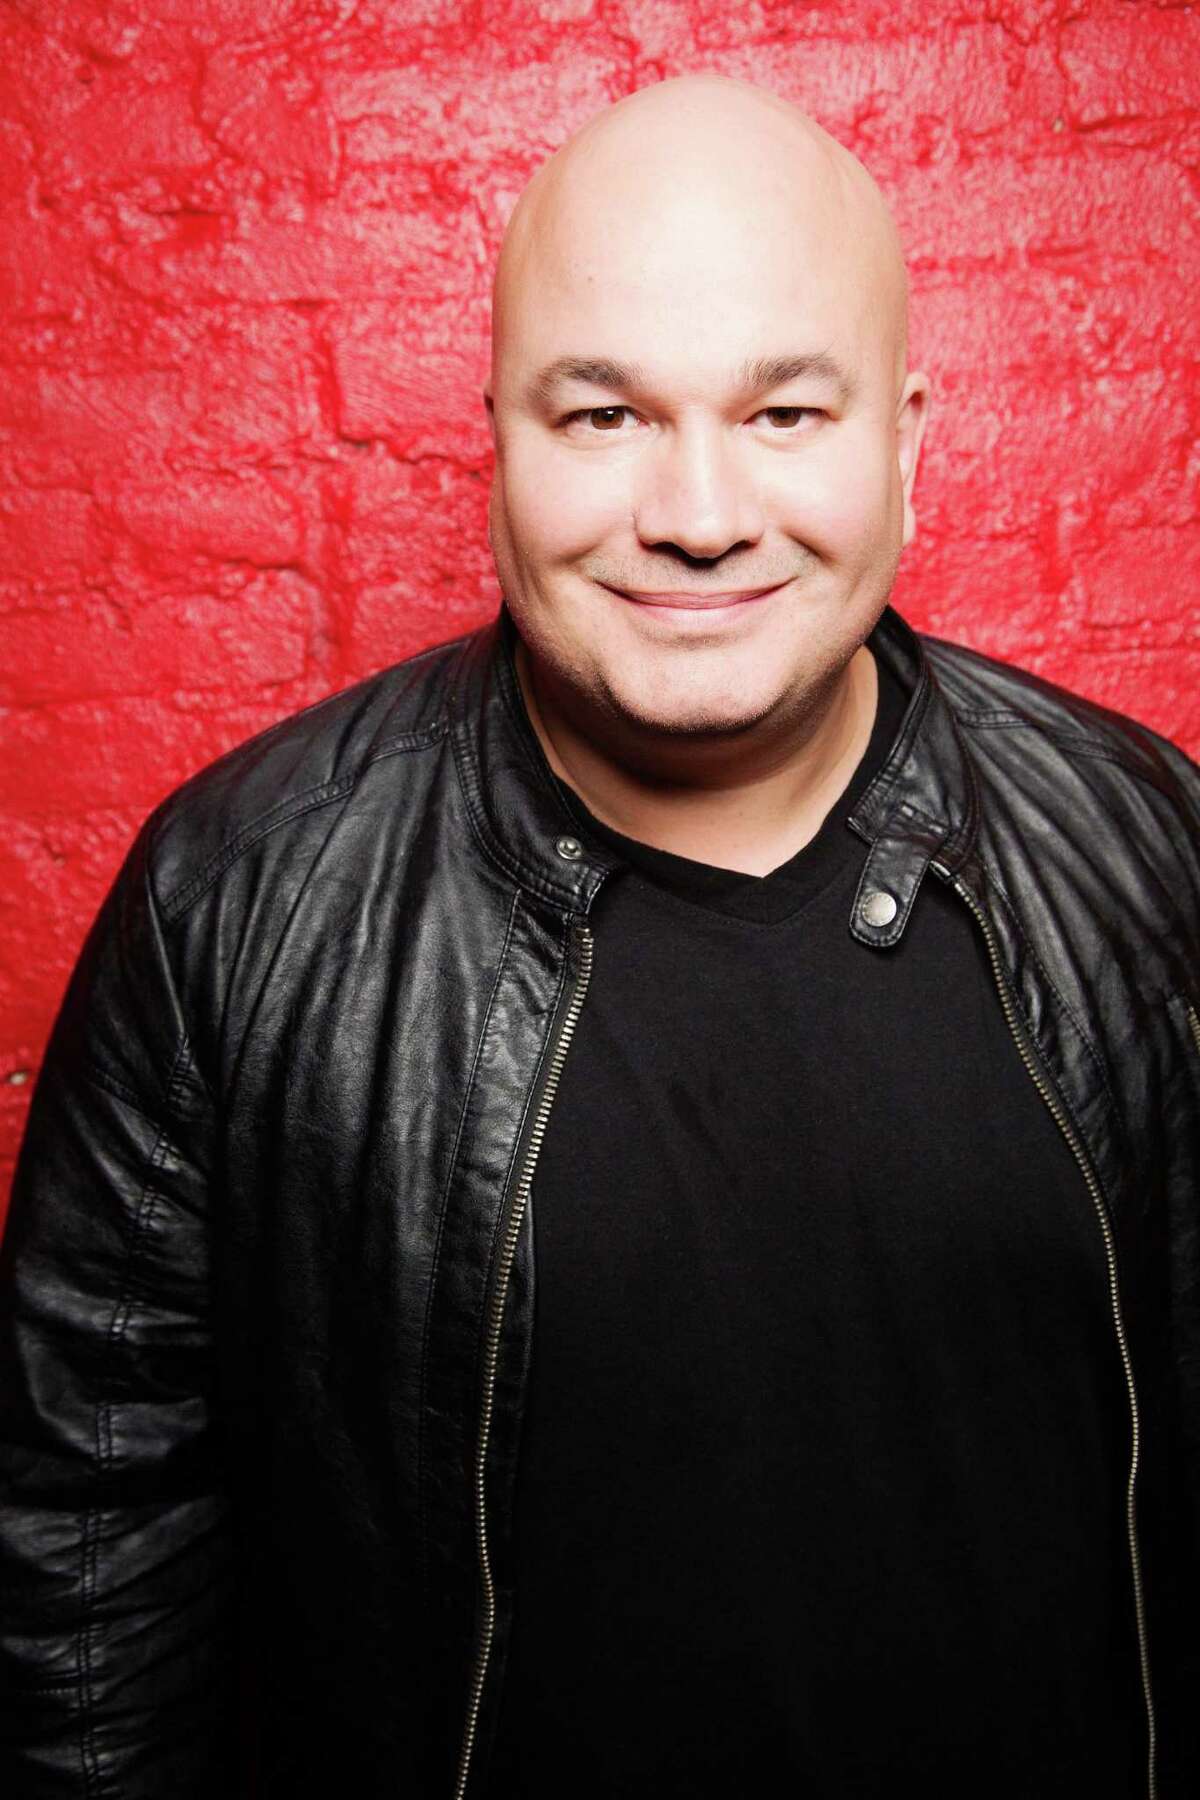 Robert Kelly performs at Treehouse Comedy Club in Westport